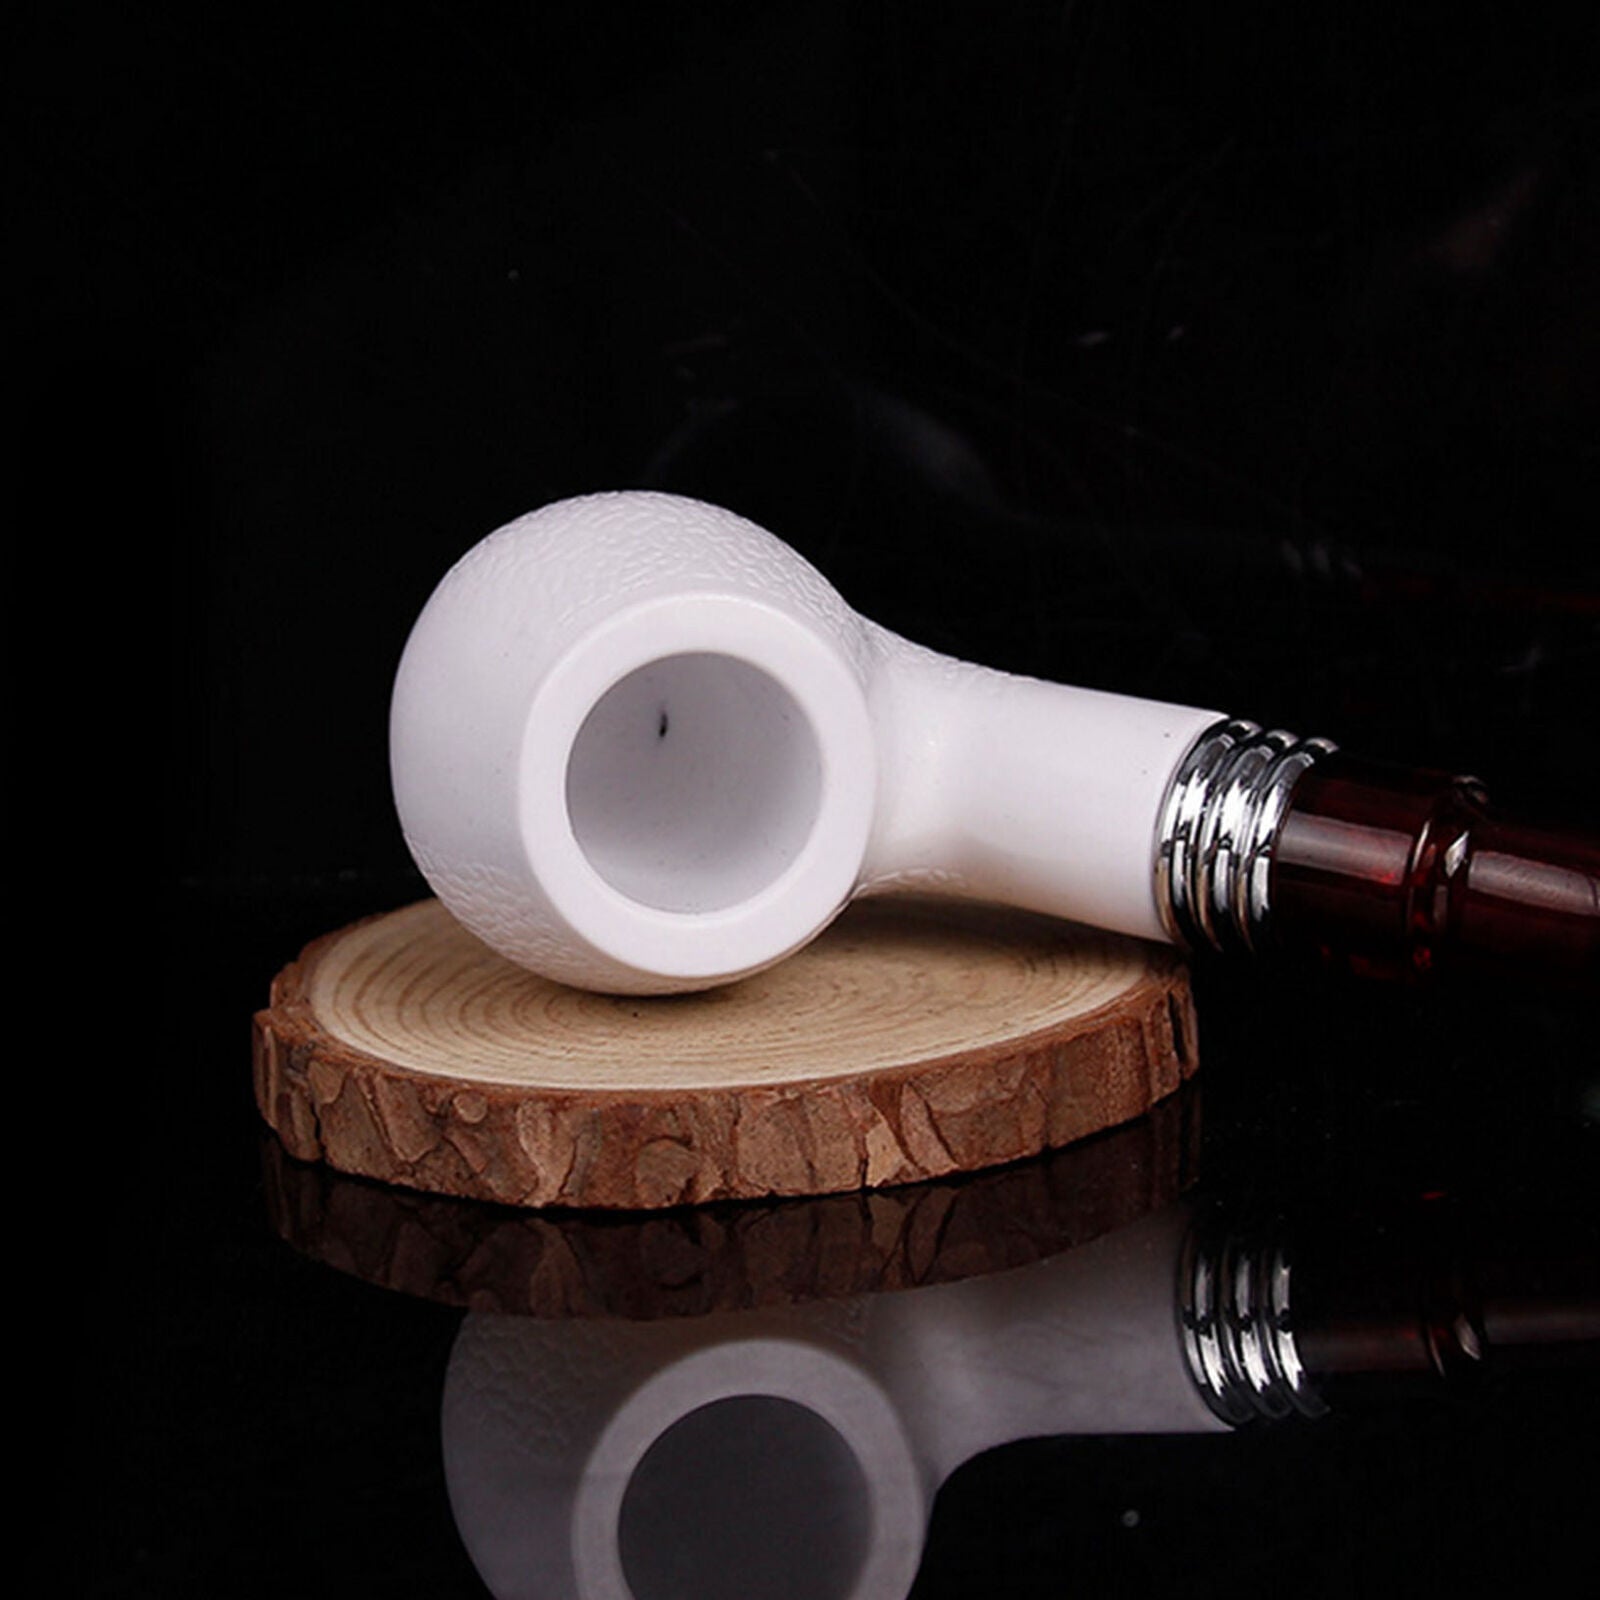 New Enchase Smoking Pipe Tobacco Cigarettes Cigar Pipes Gift Durable